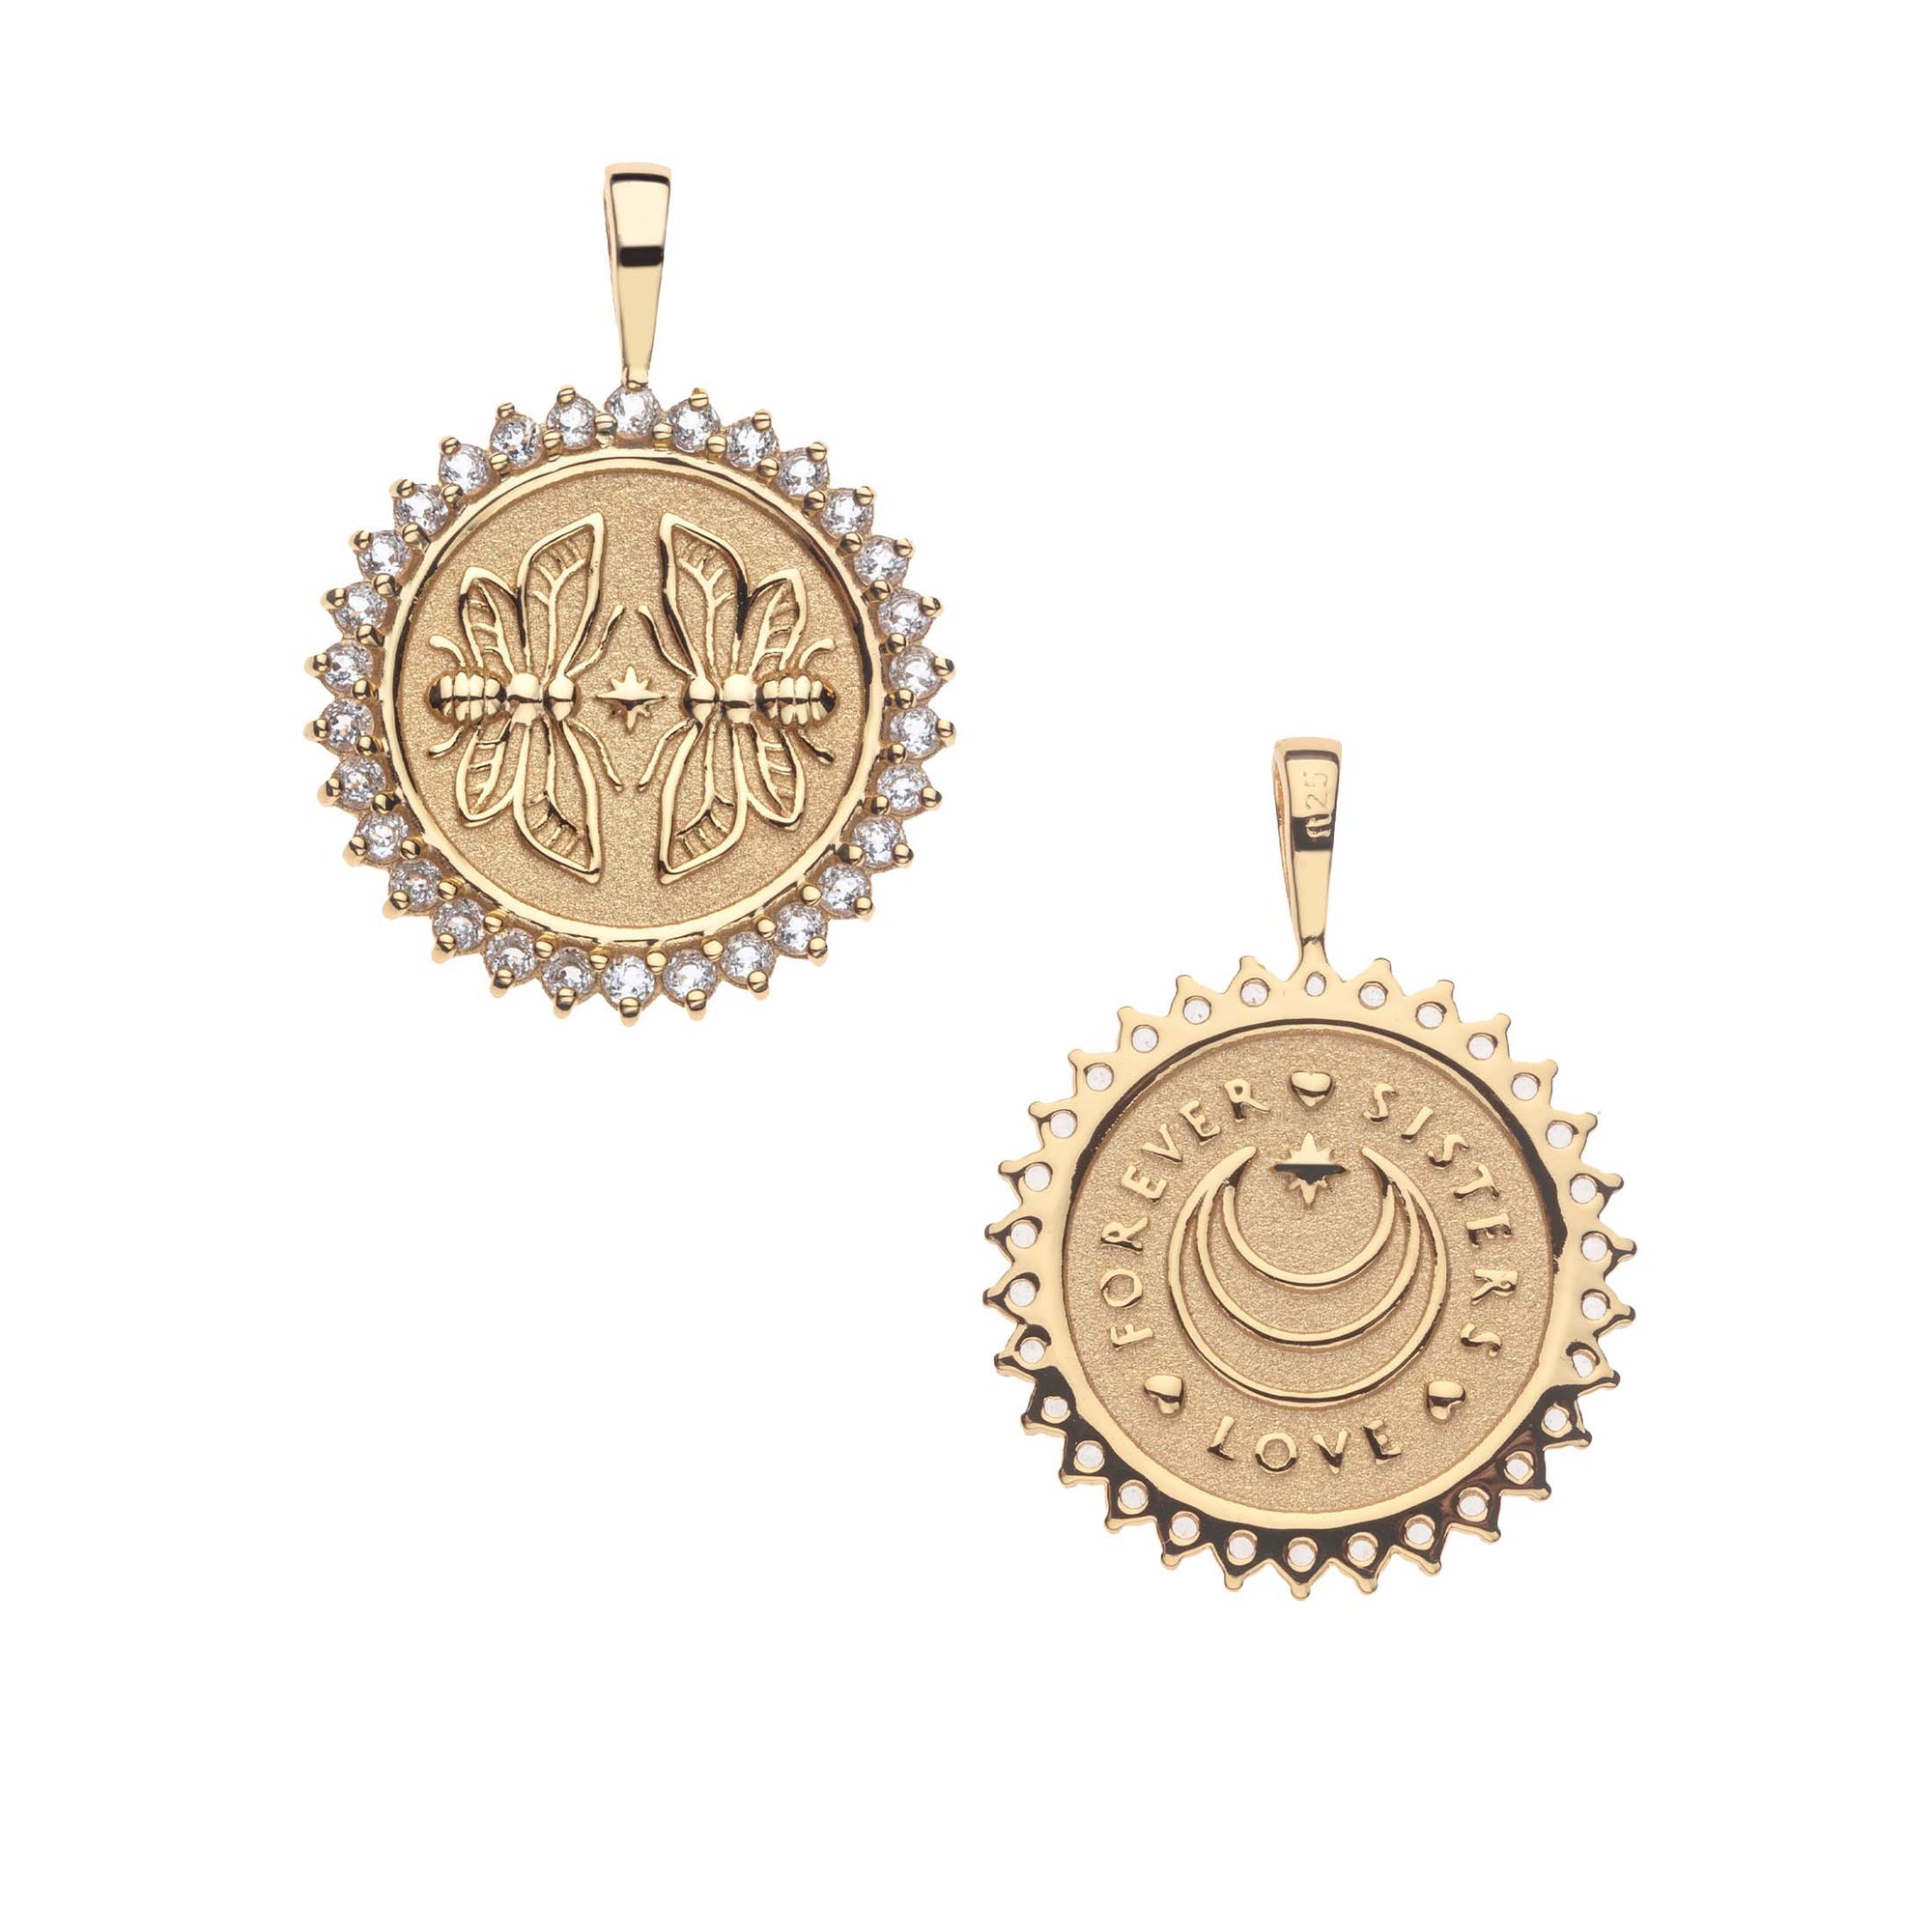 SISTERS Forever Petite Embellished Coin Pendant